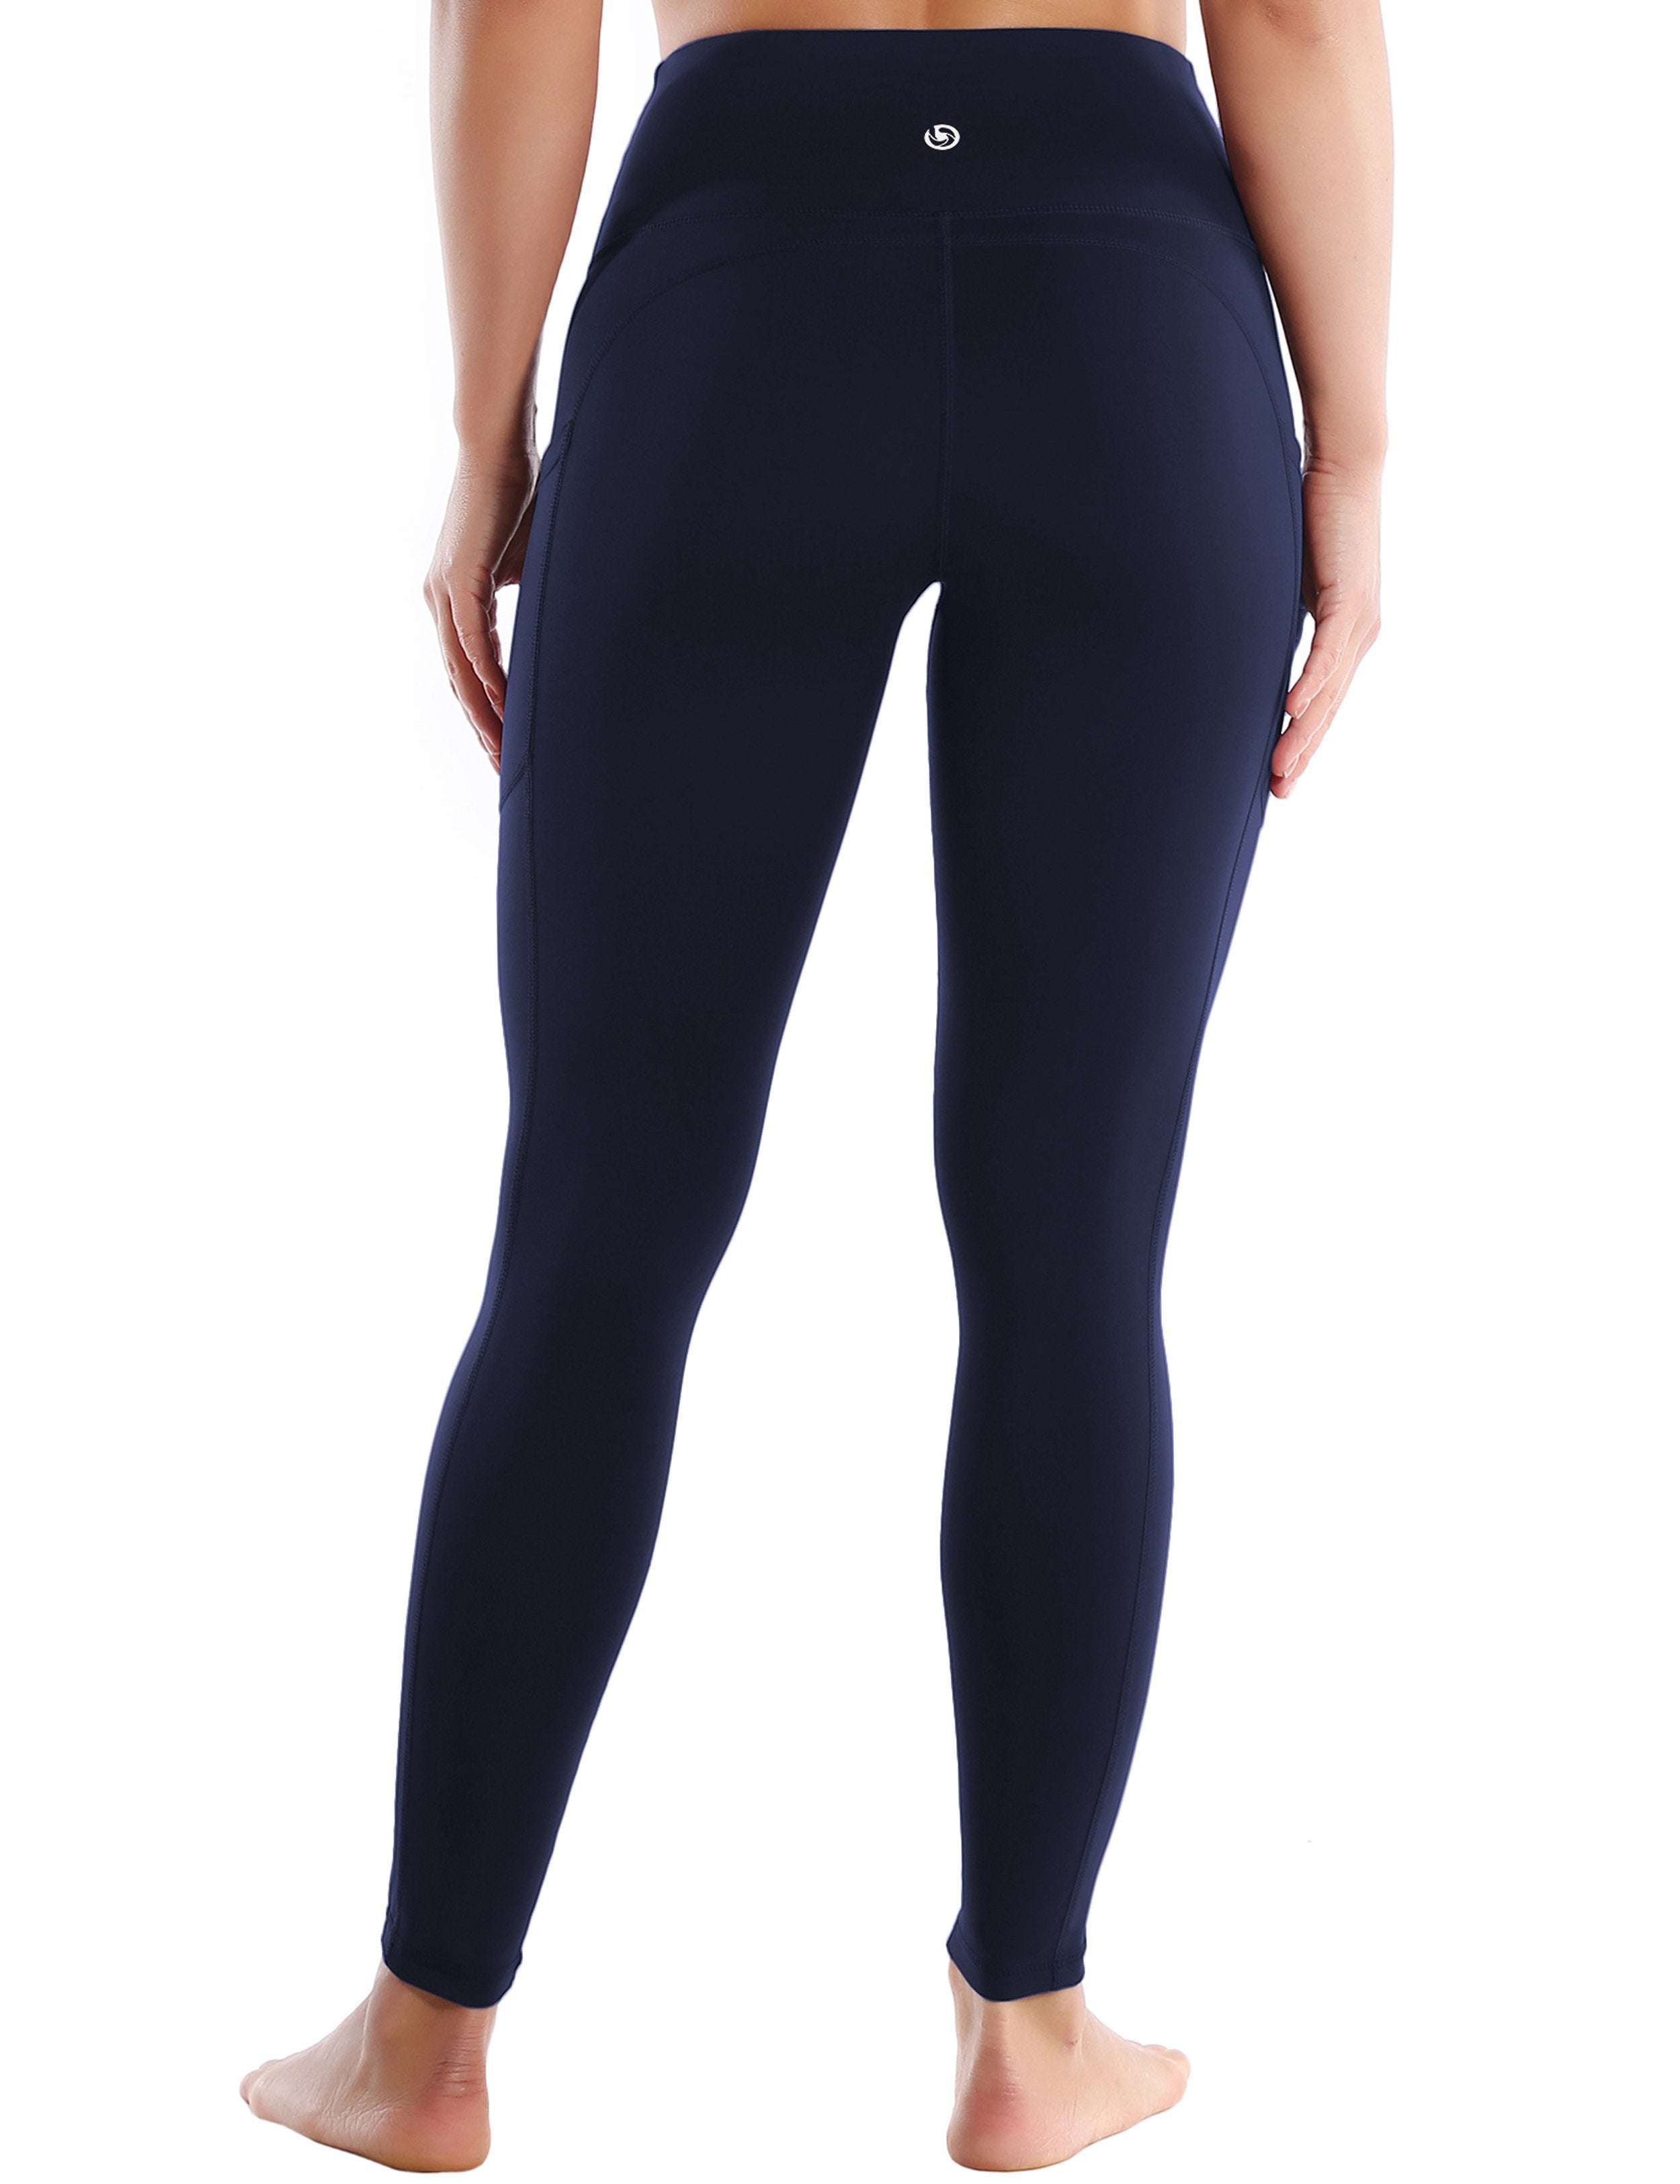 Hip Line Side Pockets Running Pants darknavy Sexy Hip Line Side Pockets 75%Nylon/25%Spandex Fabric doesn't attract lint easily 4-way stretch No see-through Moisture-wicking Tummy control Inner pocket Two lengths